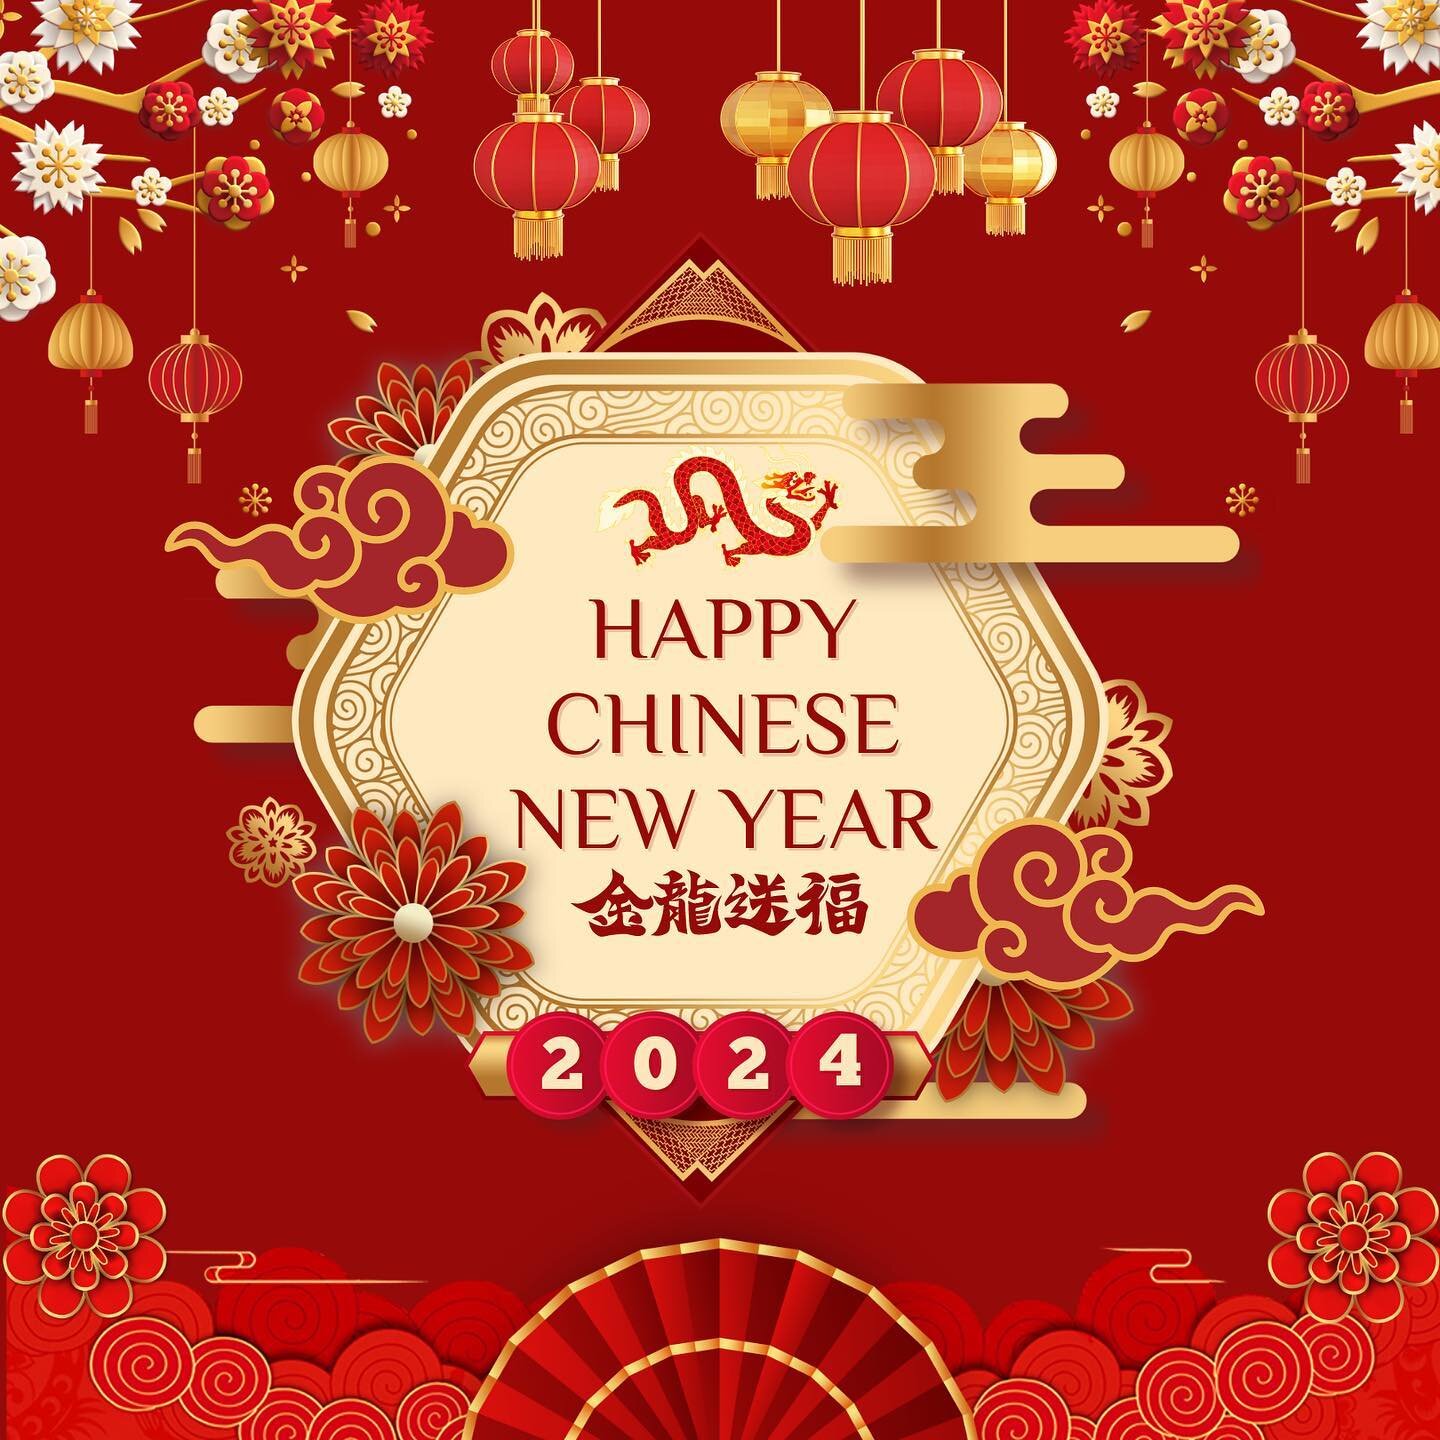 Embracing the spirit of renewal and prosperity as we welcome the Chinese New Year with joy and tradition. Wishing you a yeat filled with good fortune, happiness, and endless possibilities! 🧧 🎉 #chinesenewyear #yearofabundance